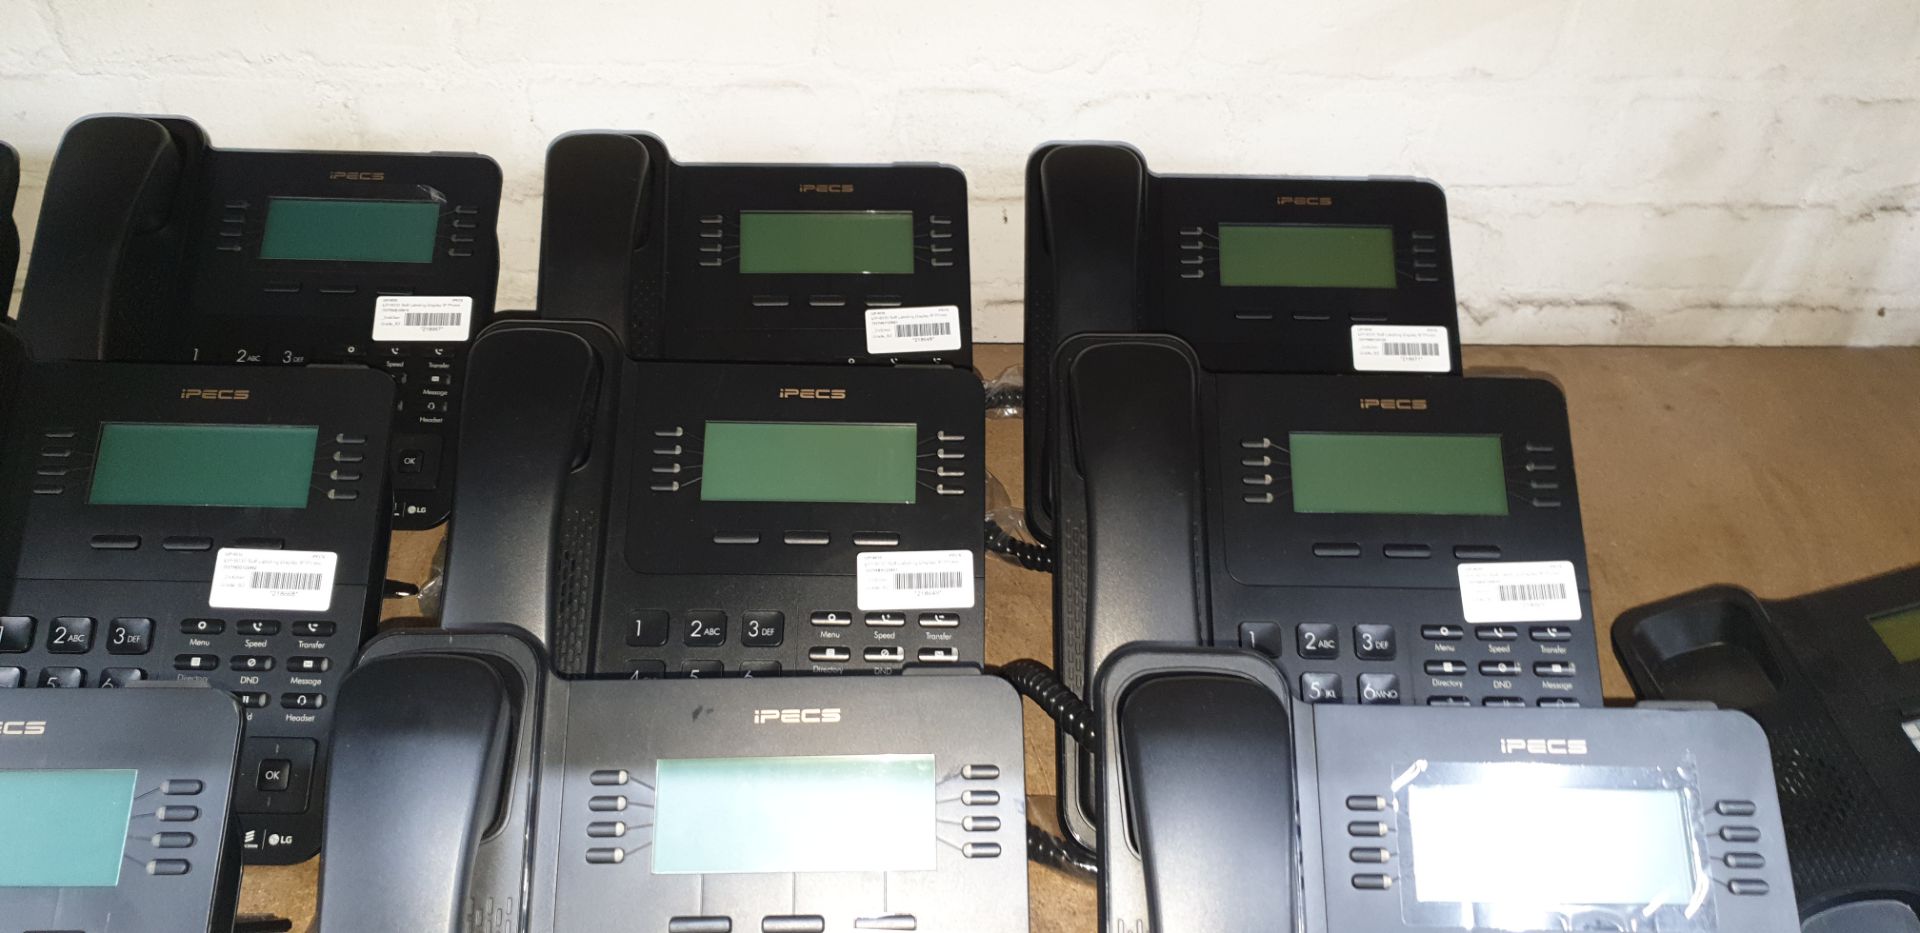 13 off iPECS IP phone handsets, comprising 12 off model LIP-9030 & 1 off LIP model 9020 with 24 butt - Image 4 of 8